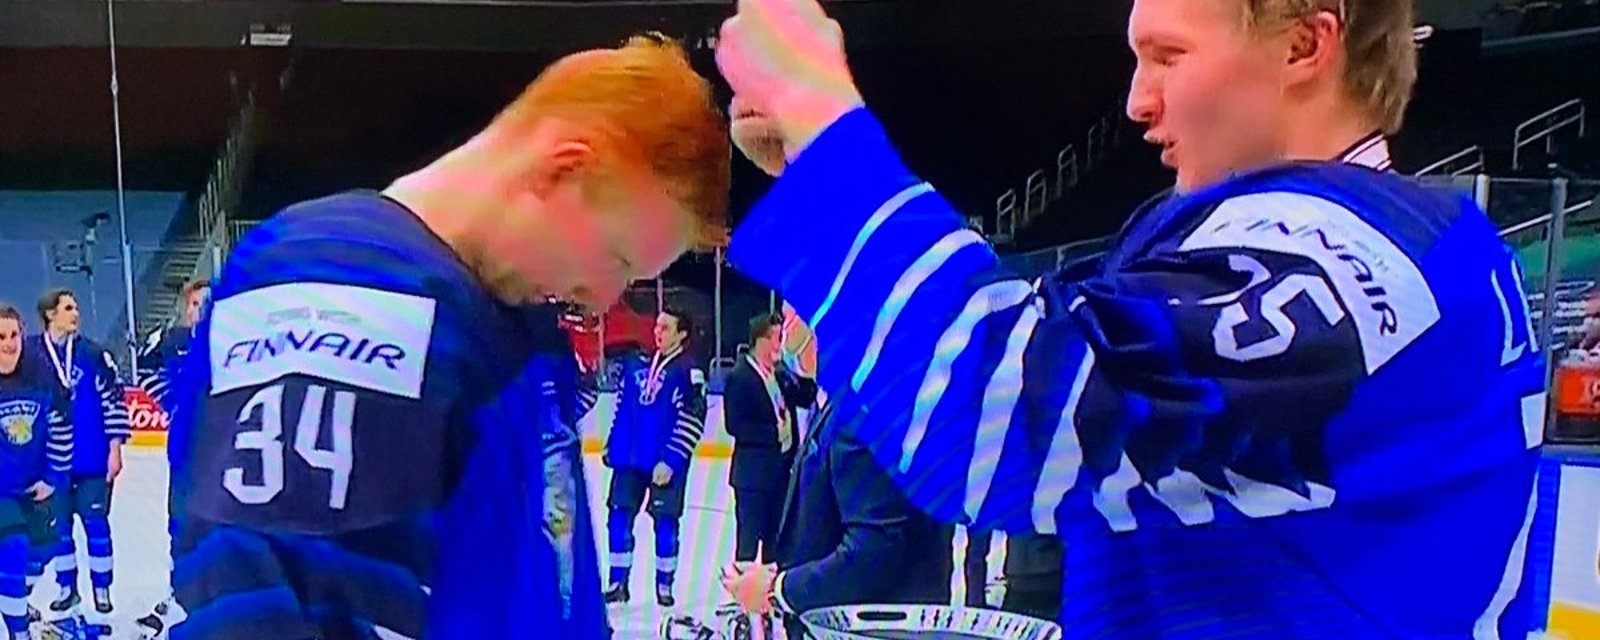 Team Finland forced to receive bronze medal in new touching yet awkward setting 